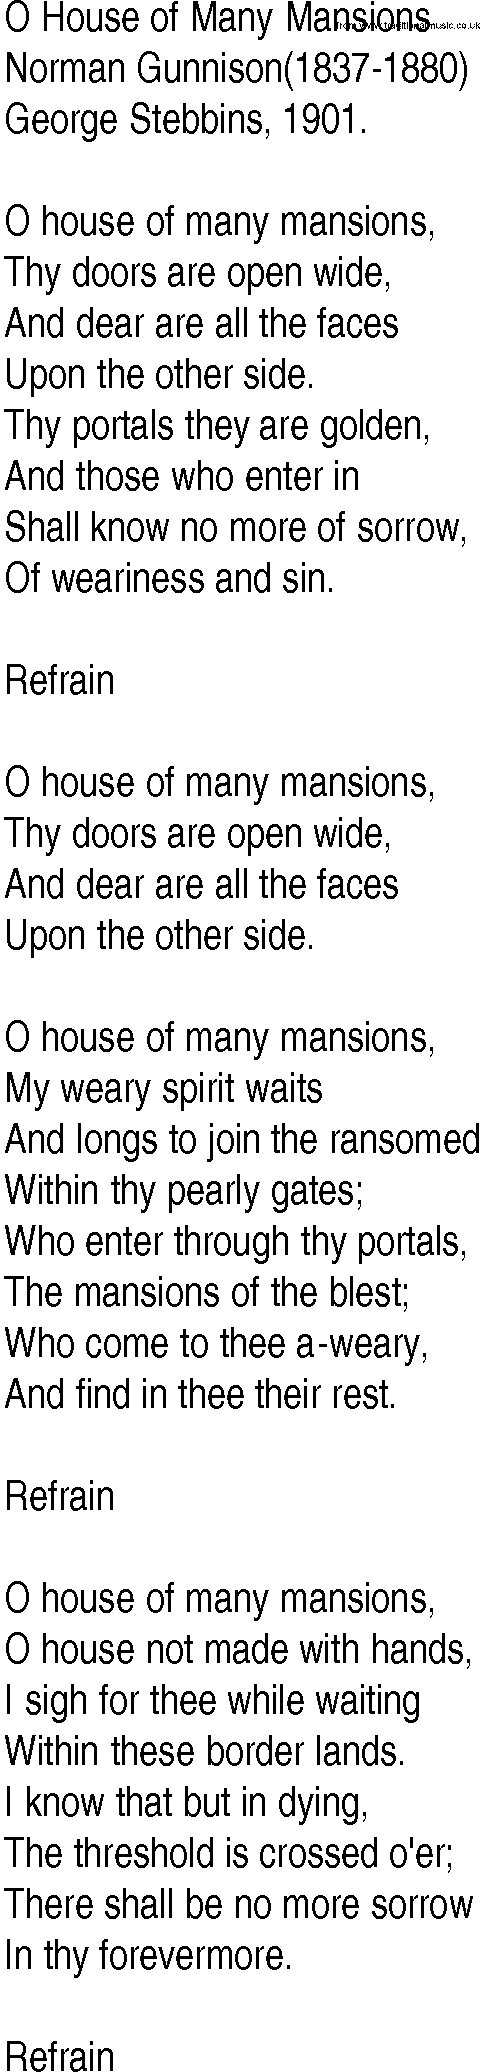 Hymn and Gospel Song: O House of Many Mansions by Norman Gunnison lyrics